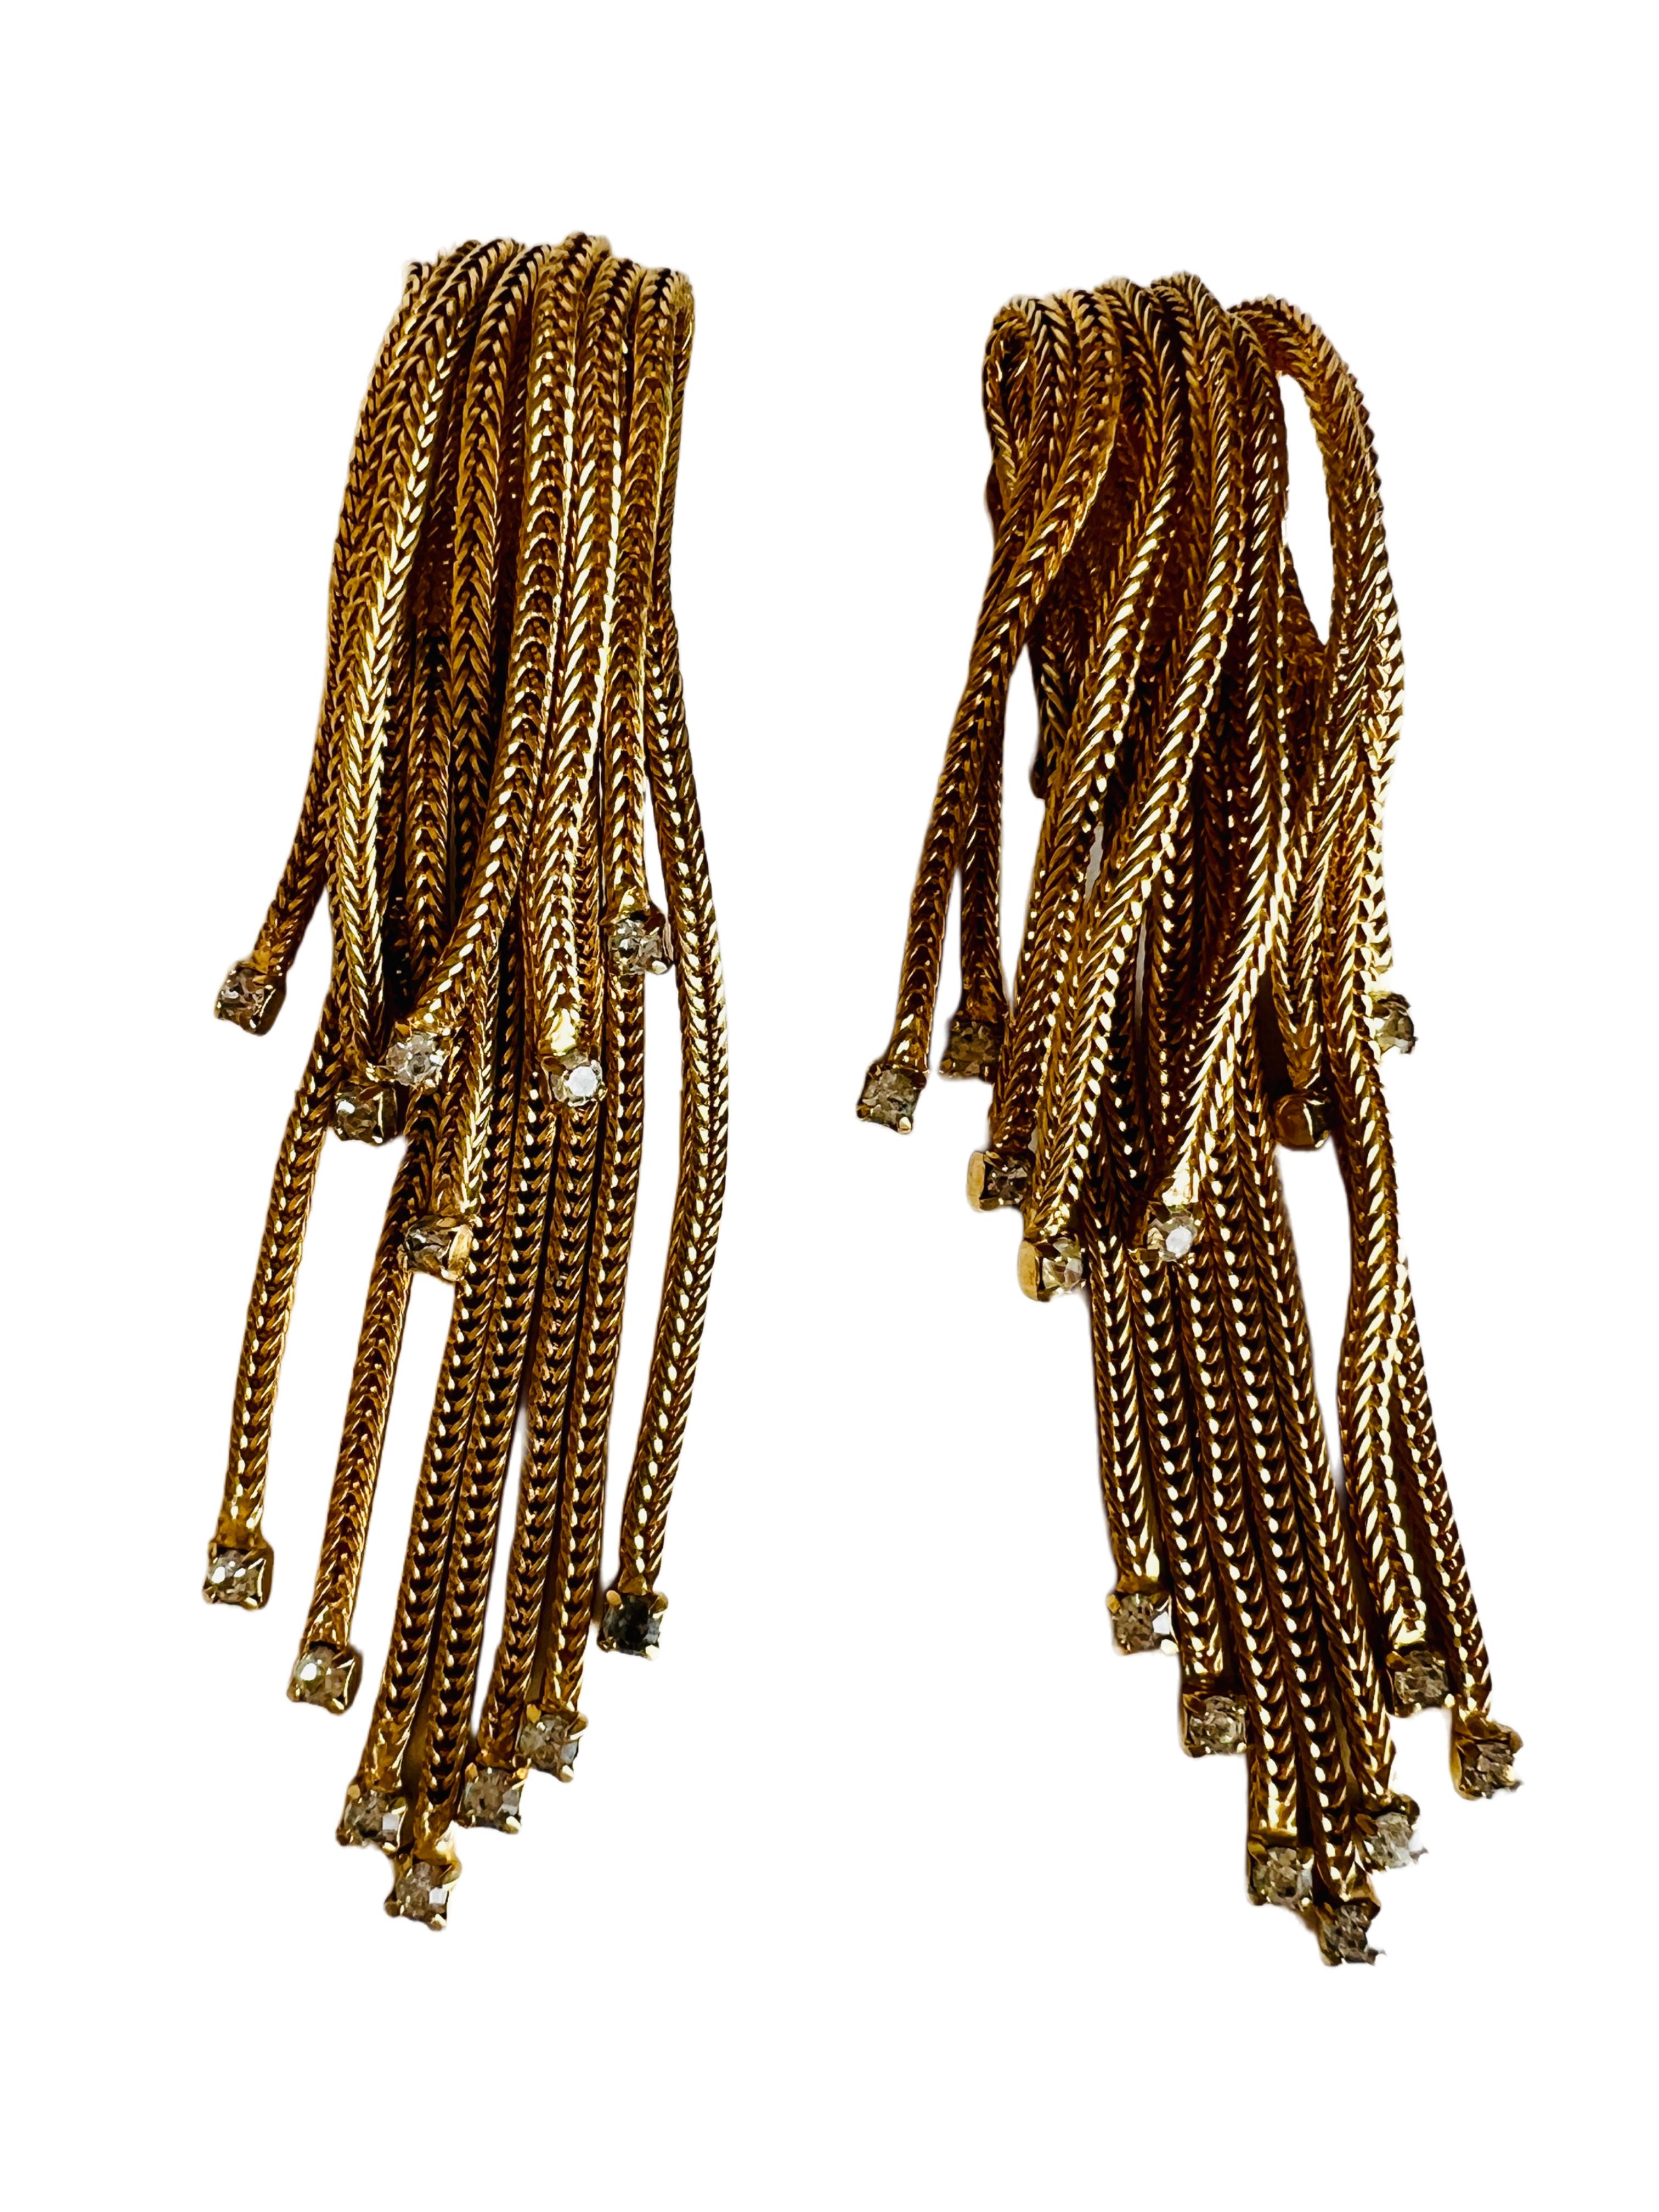 Hattie Carnegie Gold Mesh Chain Waterfall Tassel Choker Necklace Earrings Set In Good Condition For Sale In Sausalito, CA